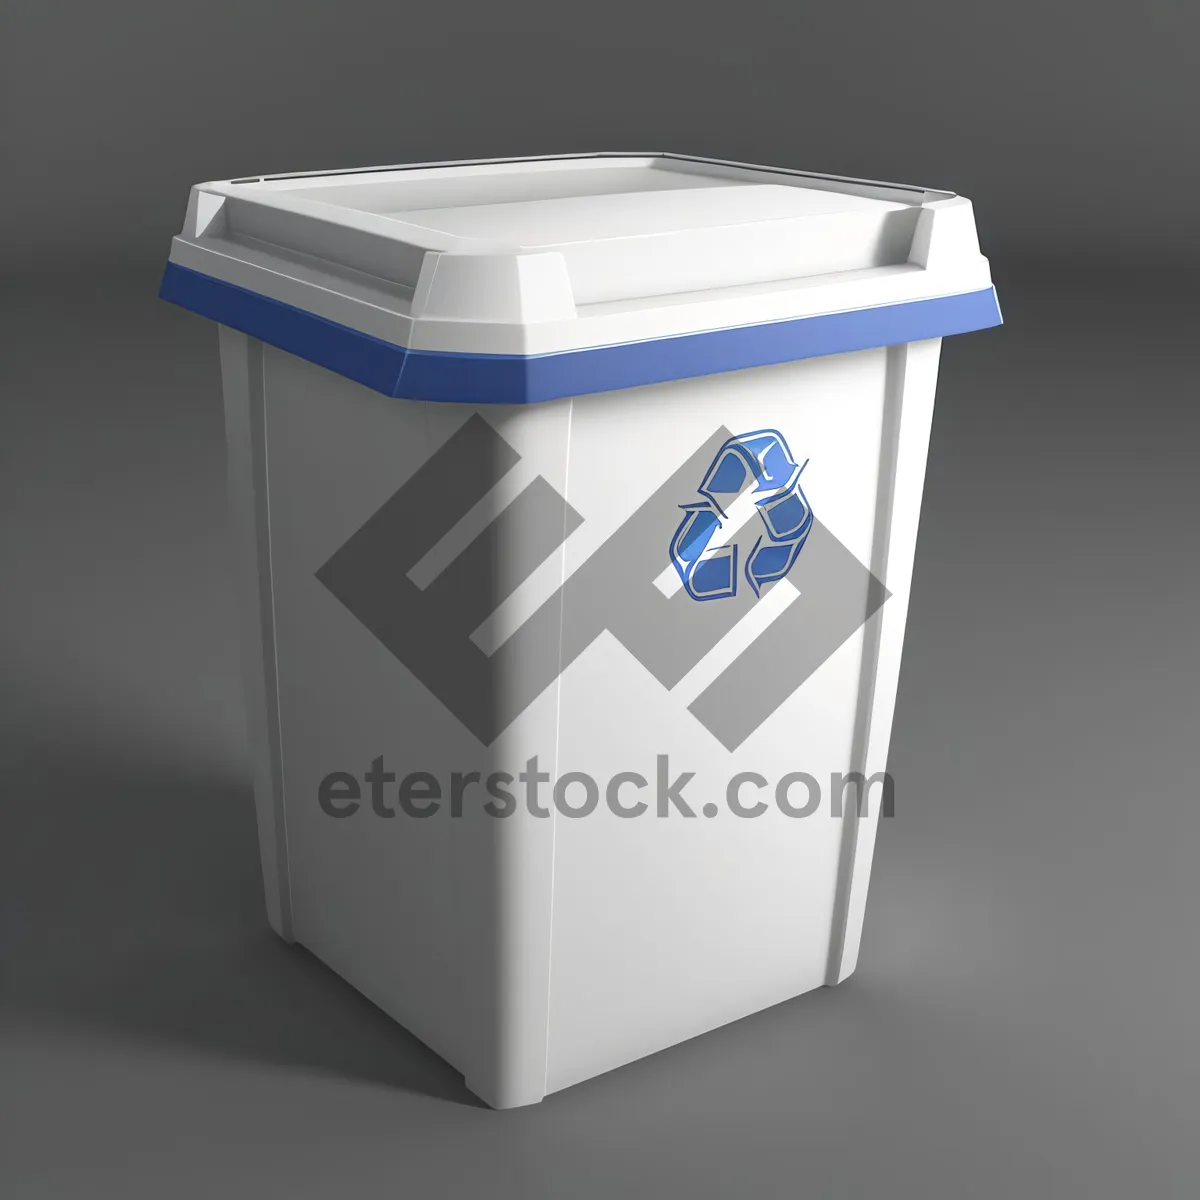 Picture of Plastic Recycle Bin Shredder: Dispose with Ease